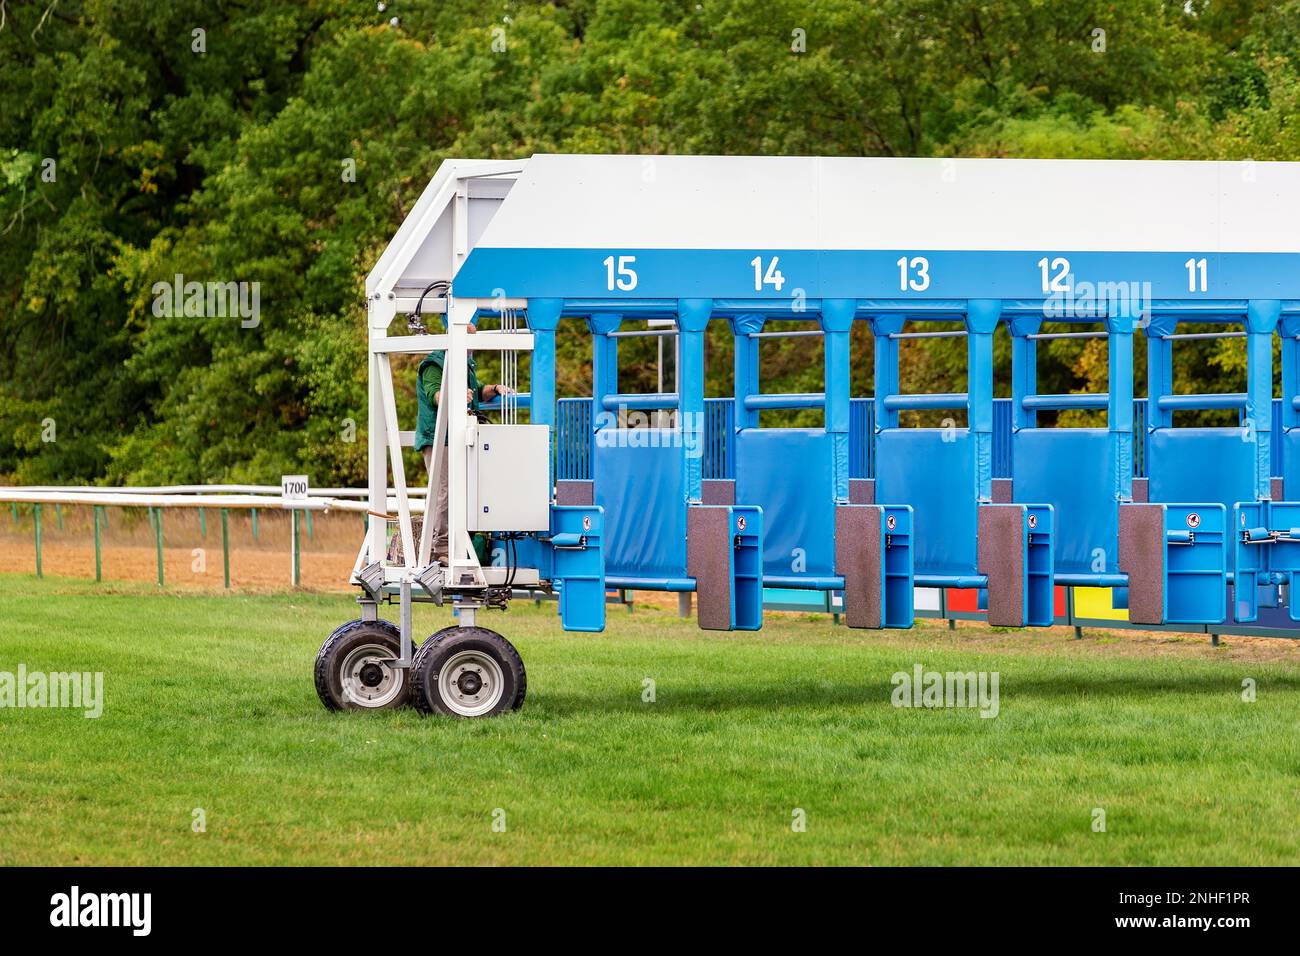 Blue horse racing starting gate on start by tractor machine at equiestrian racehorse hippodrome. Outdoor sport racecourse competition equipment Stock Photo